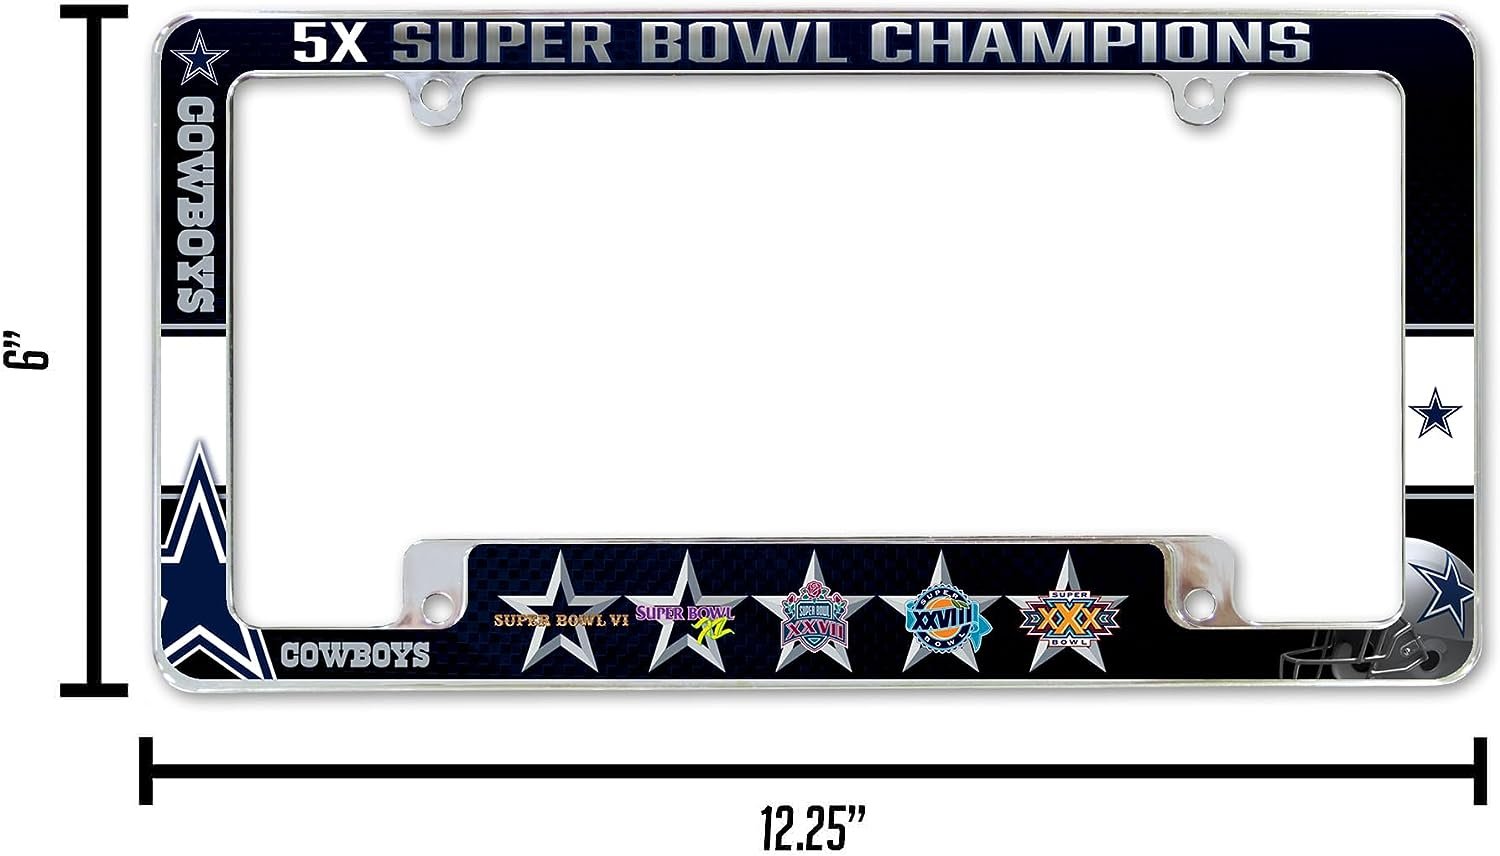 Dallas Cowboys 5-Time Champions Metal License Plate Frame Chrome Tag Cover Alternate Design 6x12 Inch